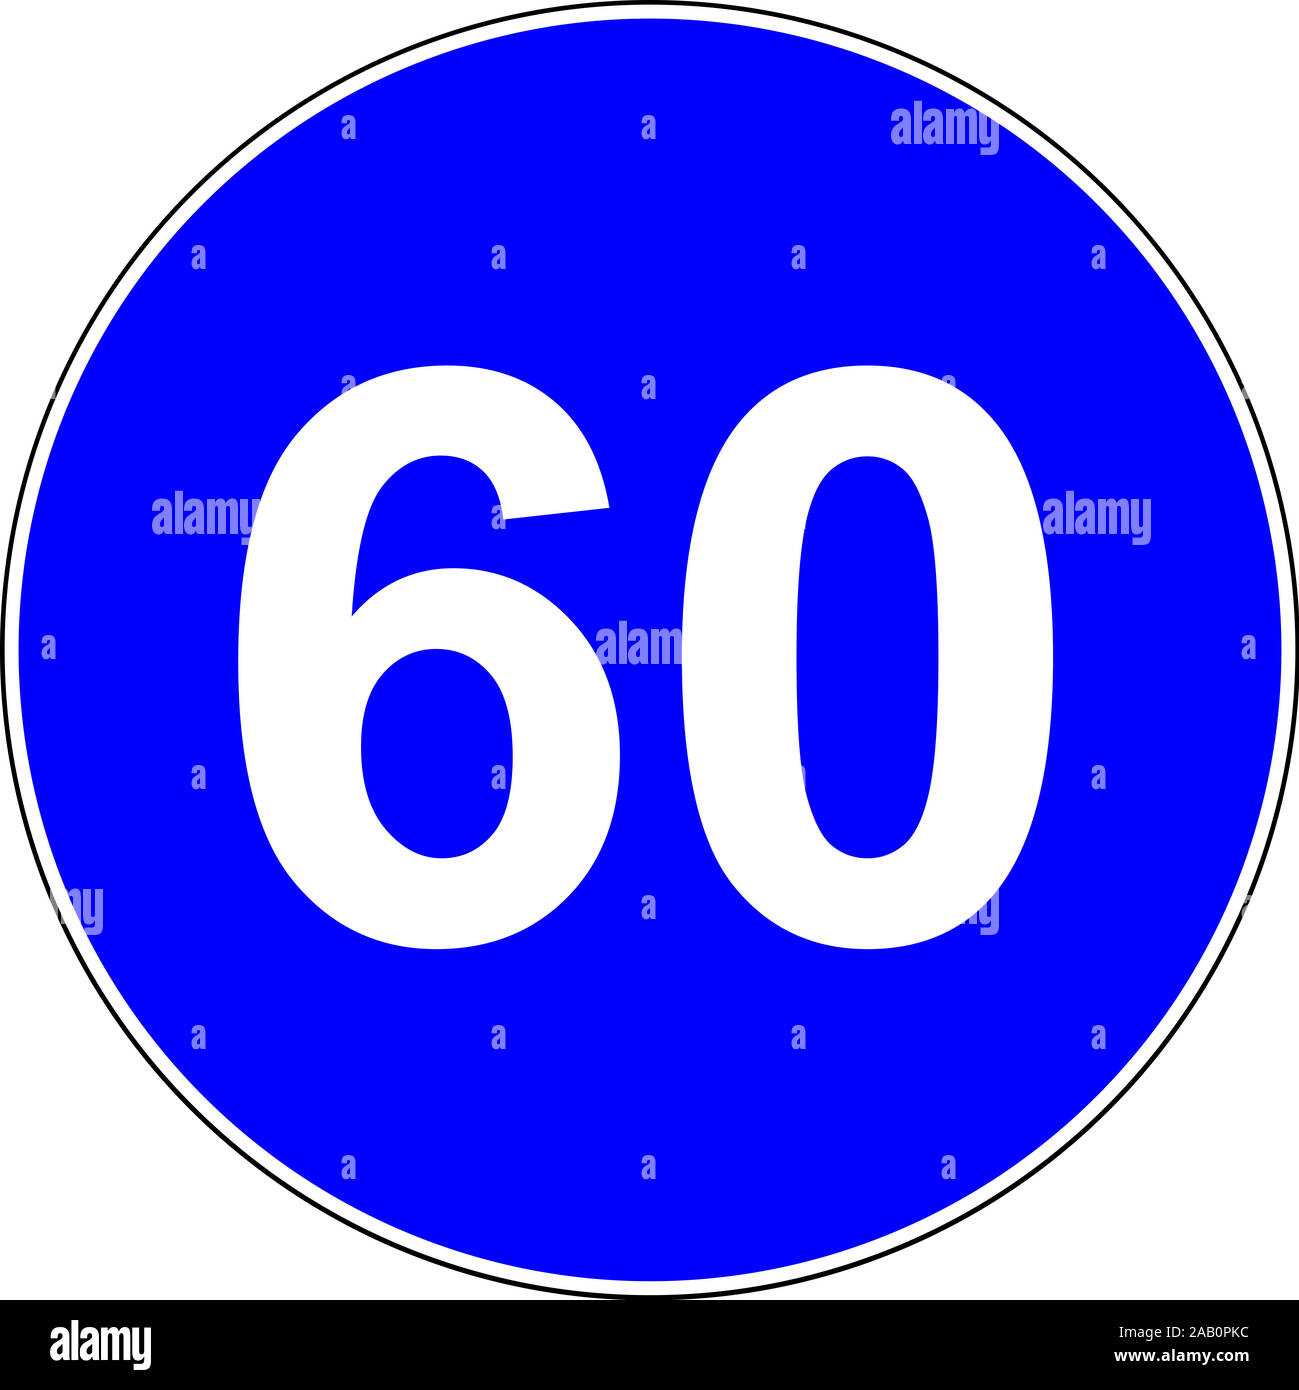 Road sign with suggested speed of 60 km/h Stock Photo